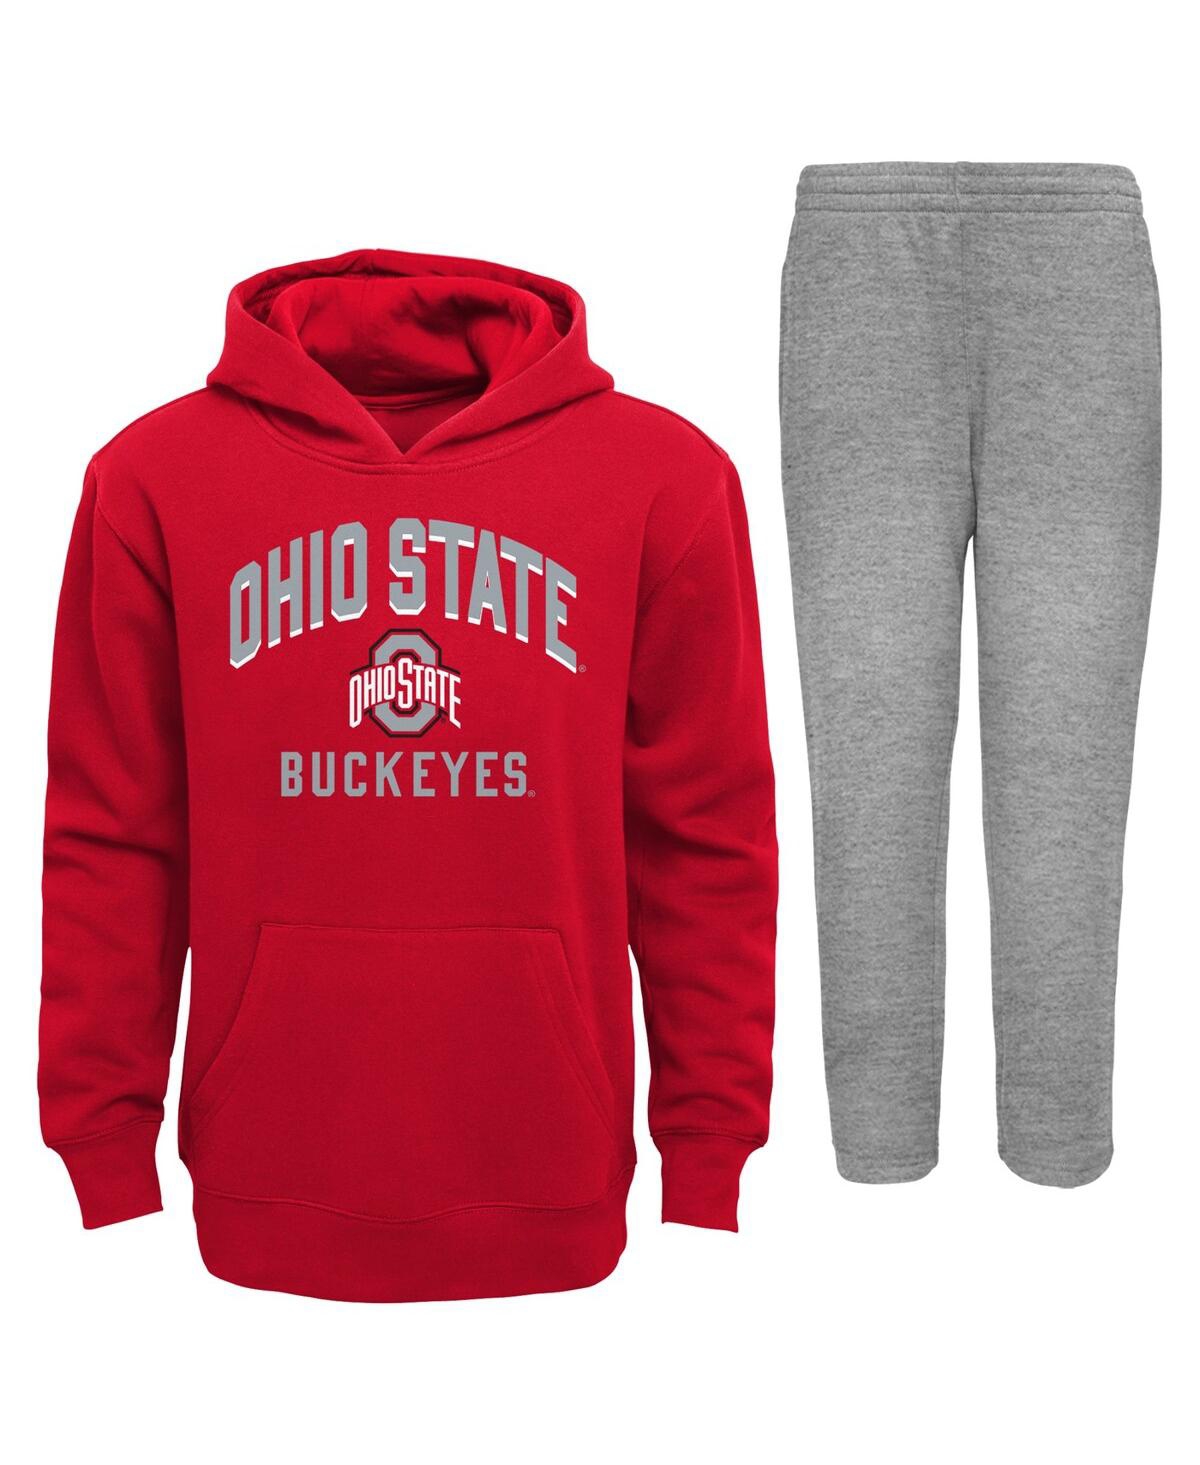 Shop Outerstuff Infant Boys And Girls Scarlet, Gray Ohio State Buckeyes Play-by-play Pullover Fleece Hoodie And Pant In Scarlet,gray